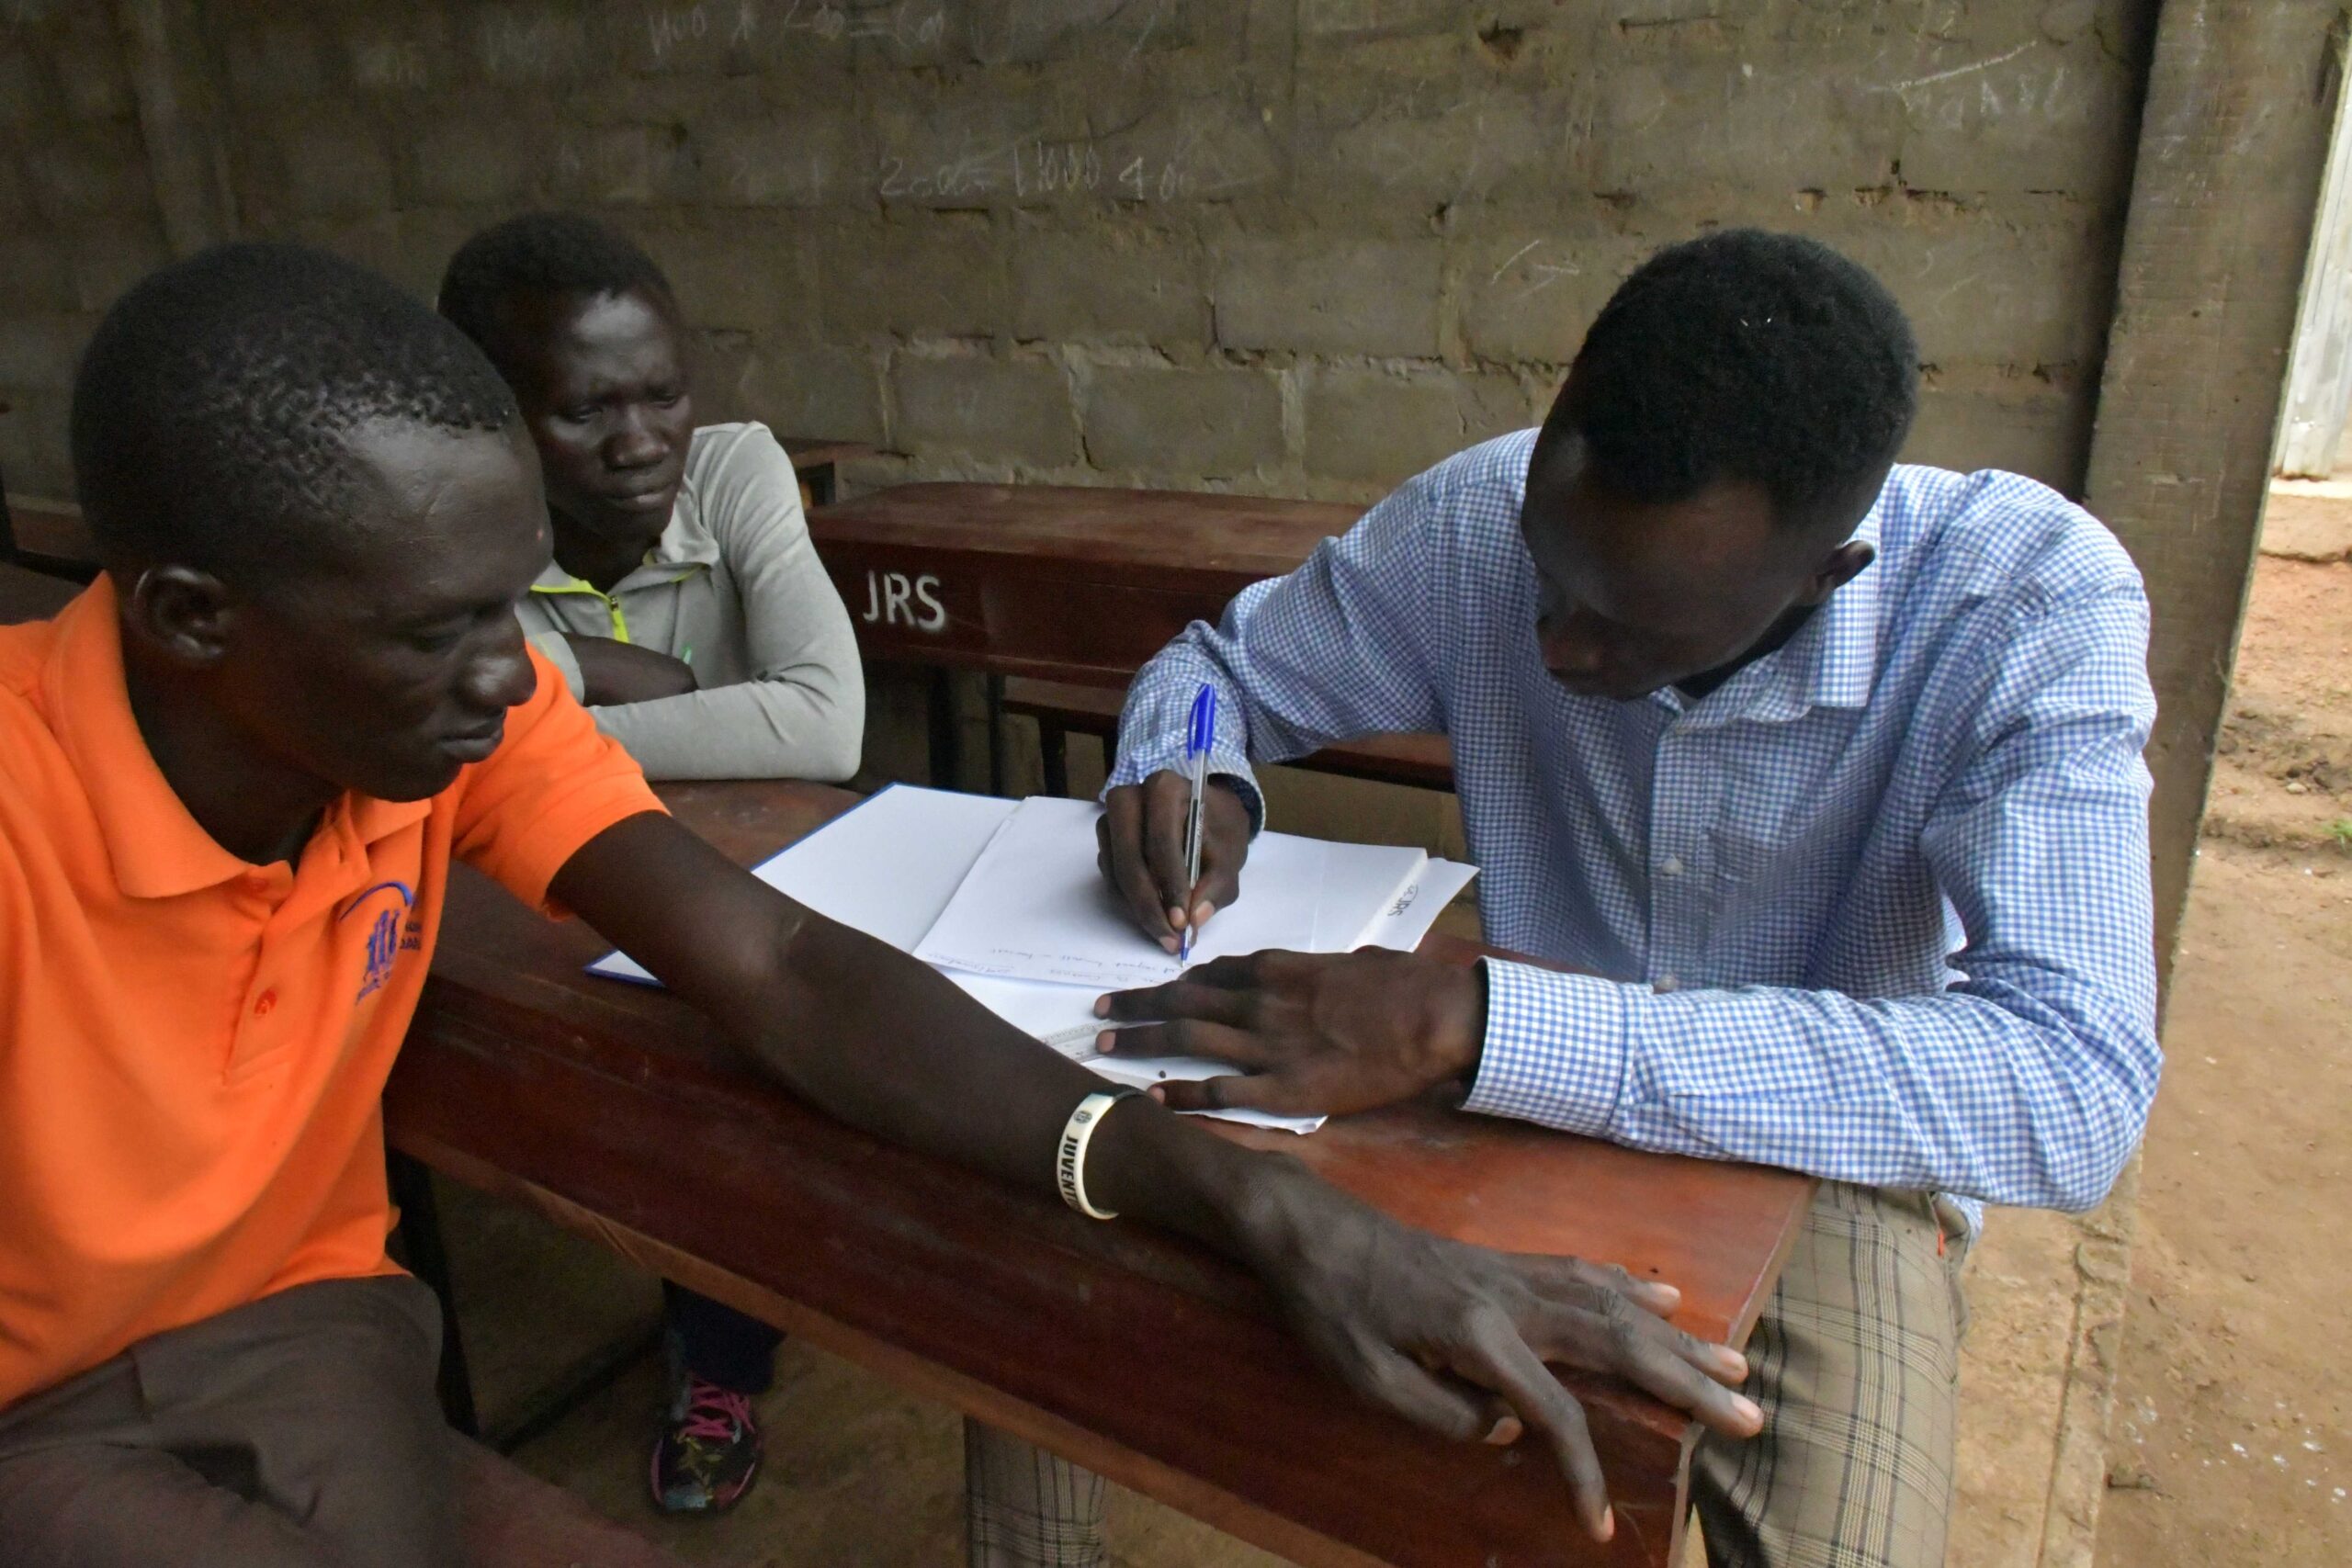 Teachers training. Two men sit at a school desk looking over a paper or textbook